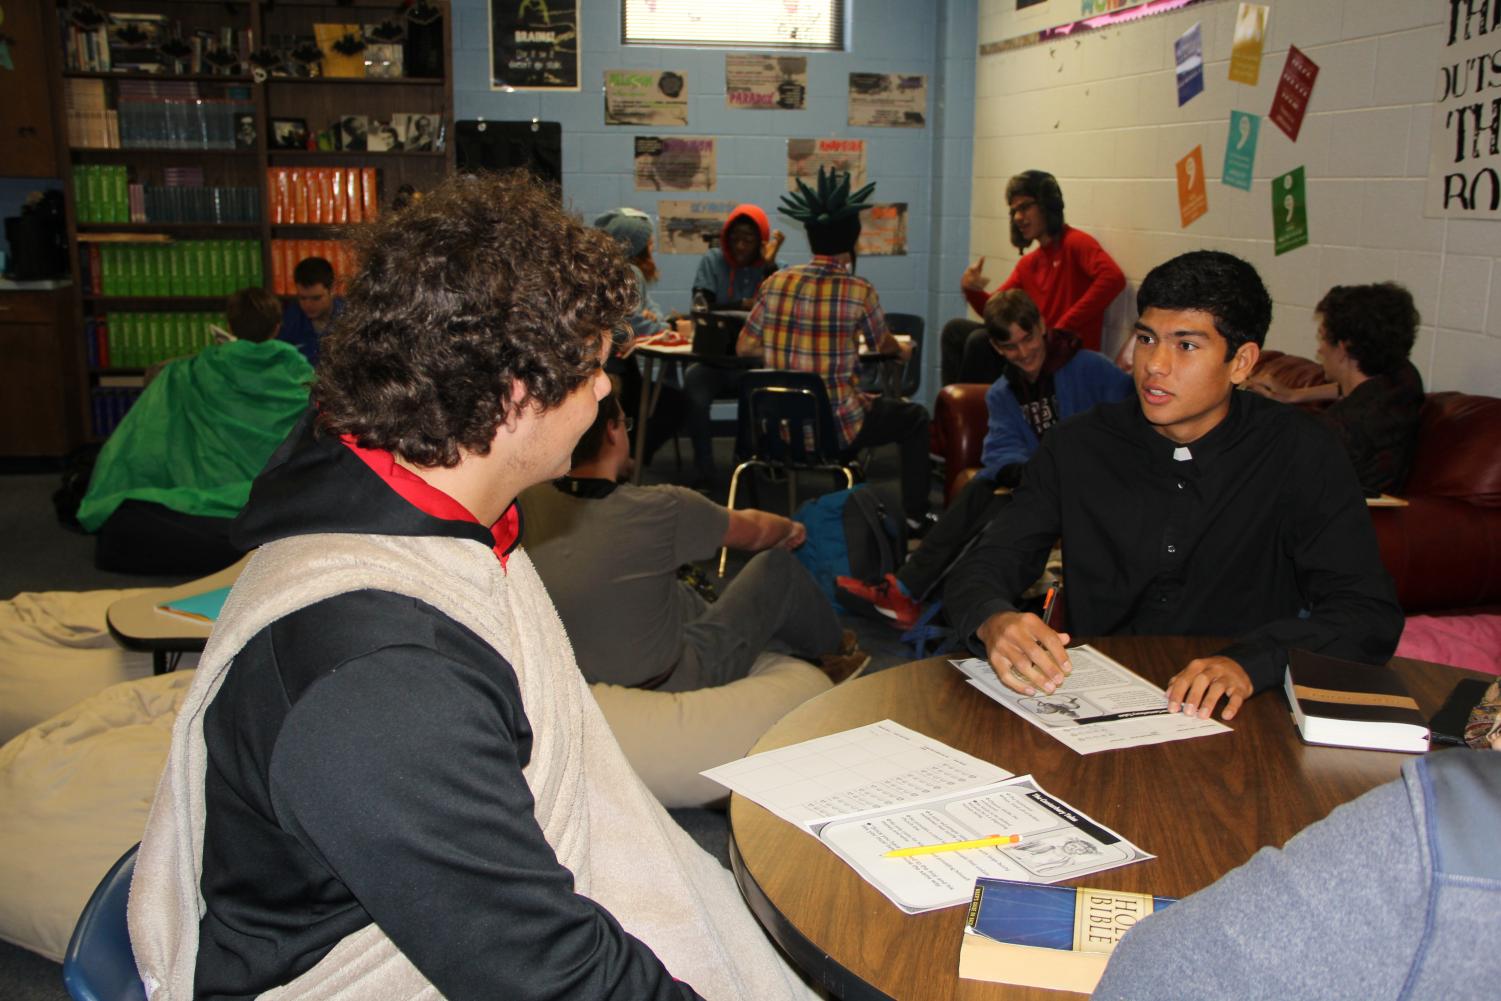 Two students engage in book dating. Rick Samaraweera (right) is giving a brief presentation of his book to another student.